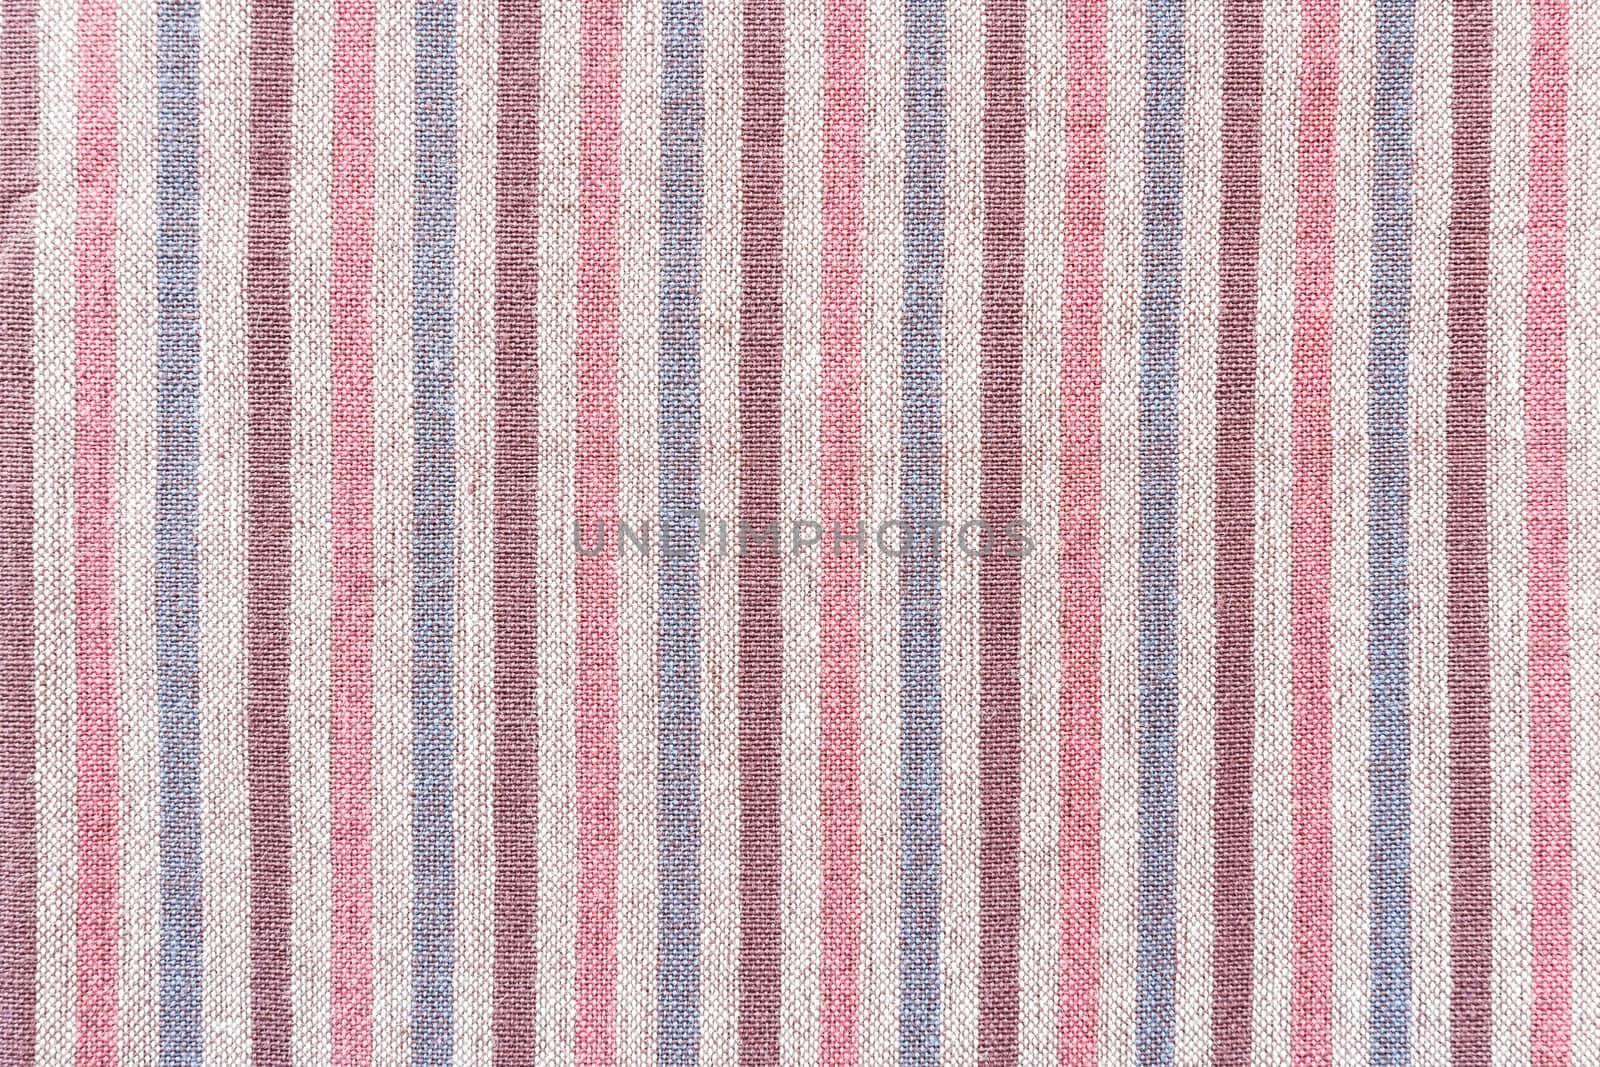 texture of native sarong with stripe pattern